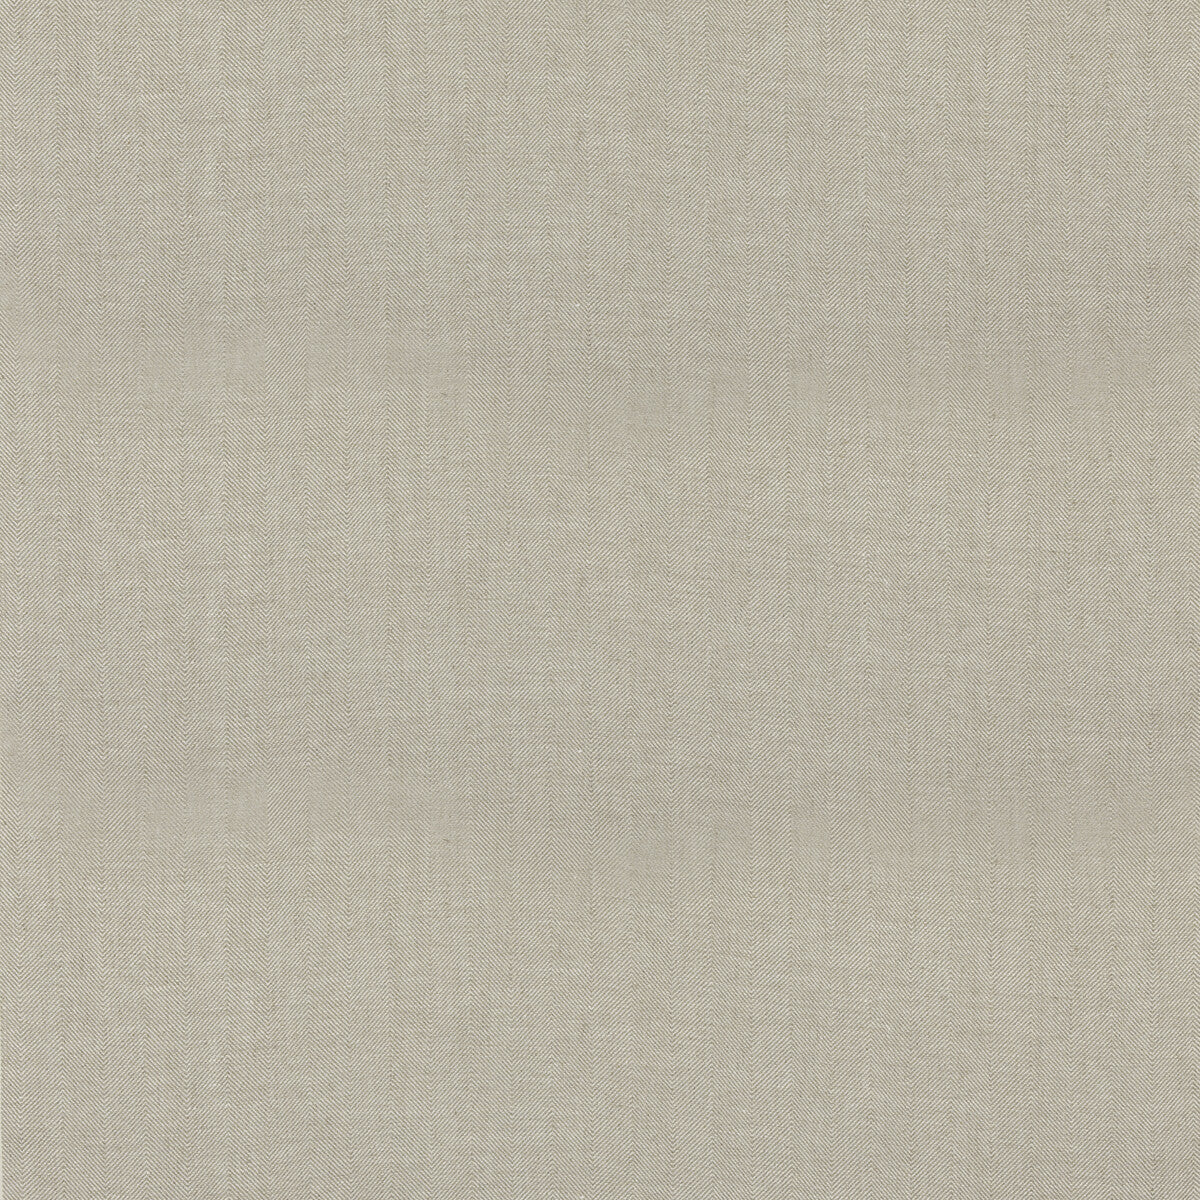 Sierra fabric in linen color - pattern ED85391.110.0 - by Threads in the Quintessential Naturals collection